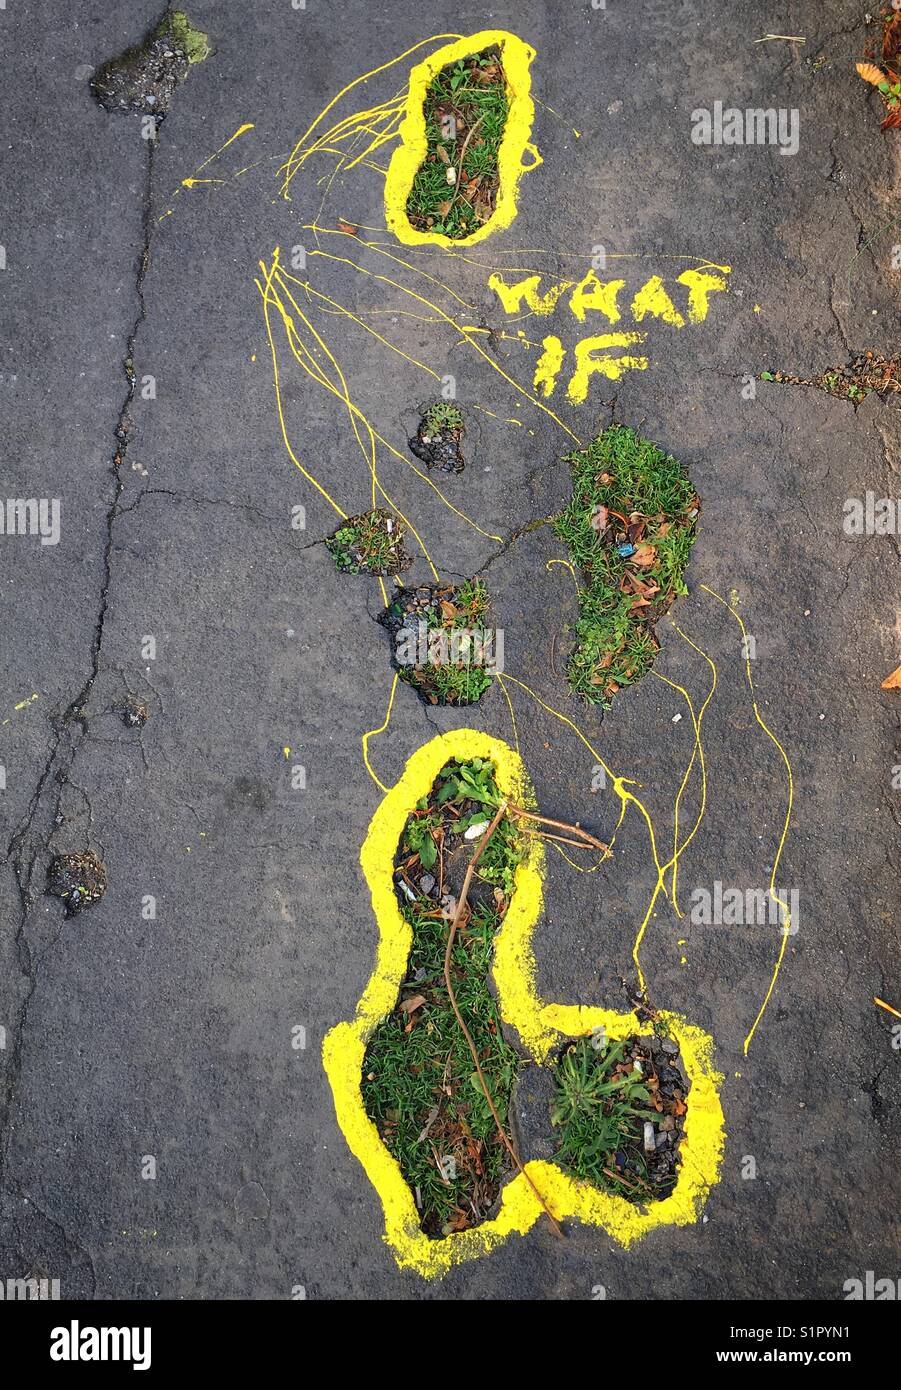 Cryptic graffiti reading “WHAT IF” on a pavement in Weston-super-Mare, UK Stock Photo